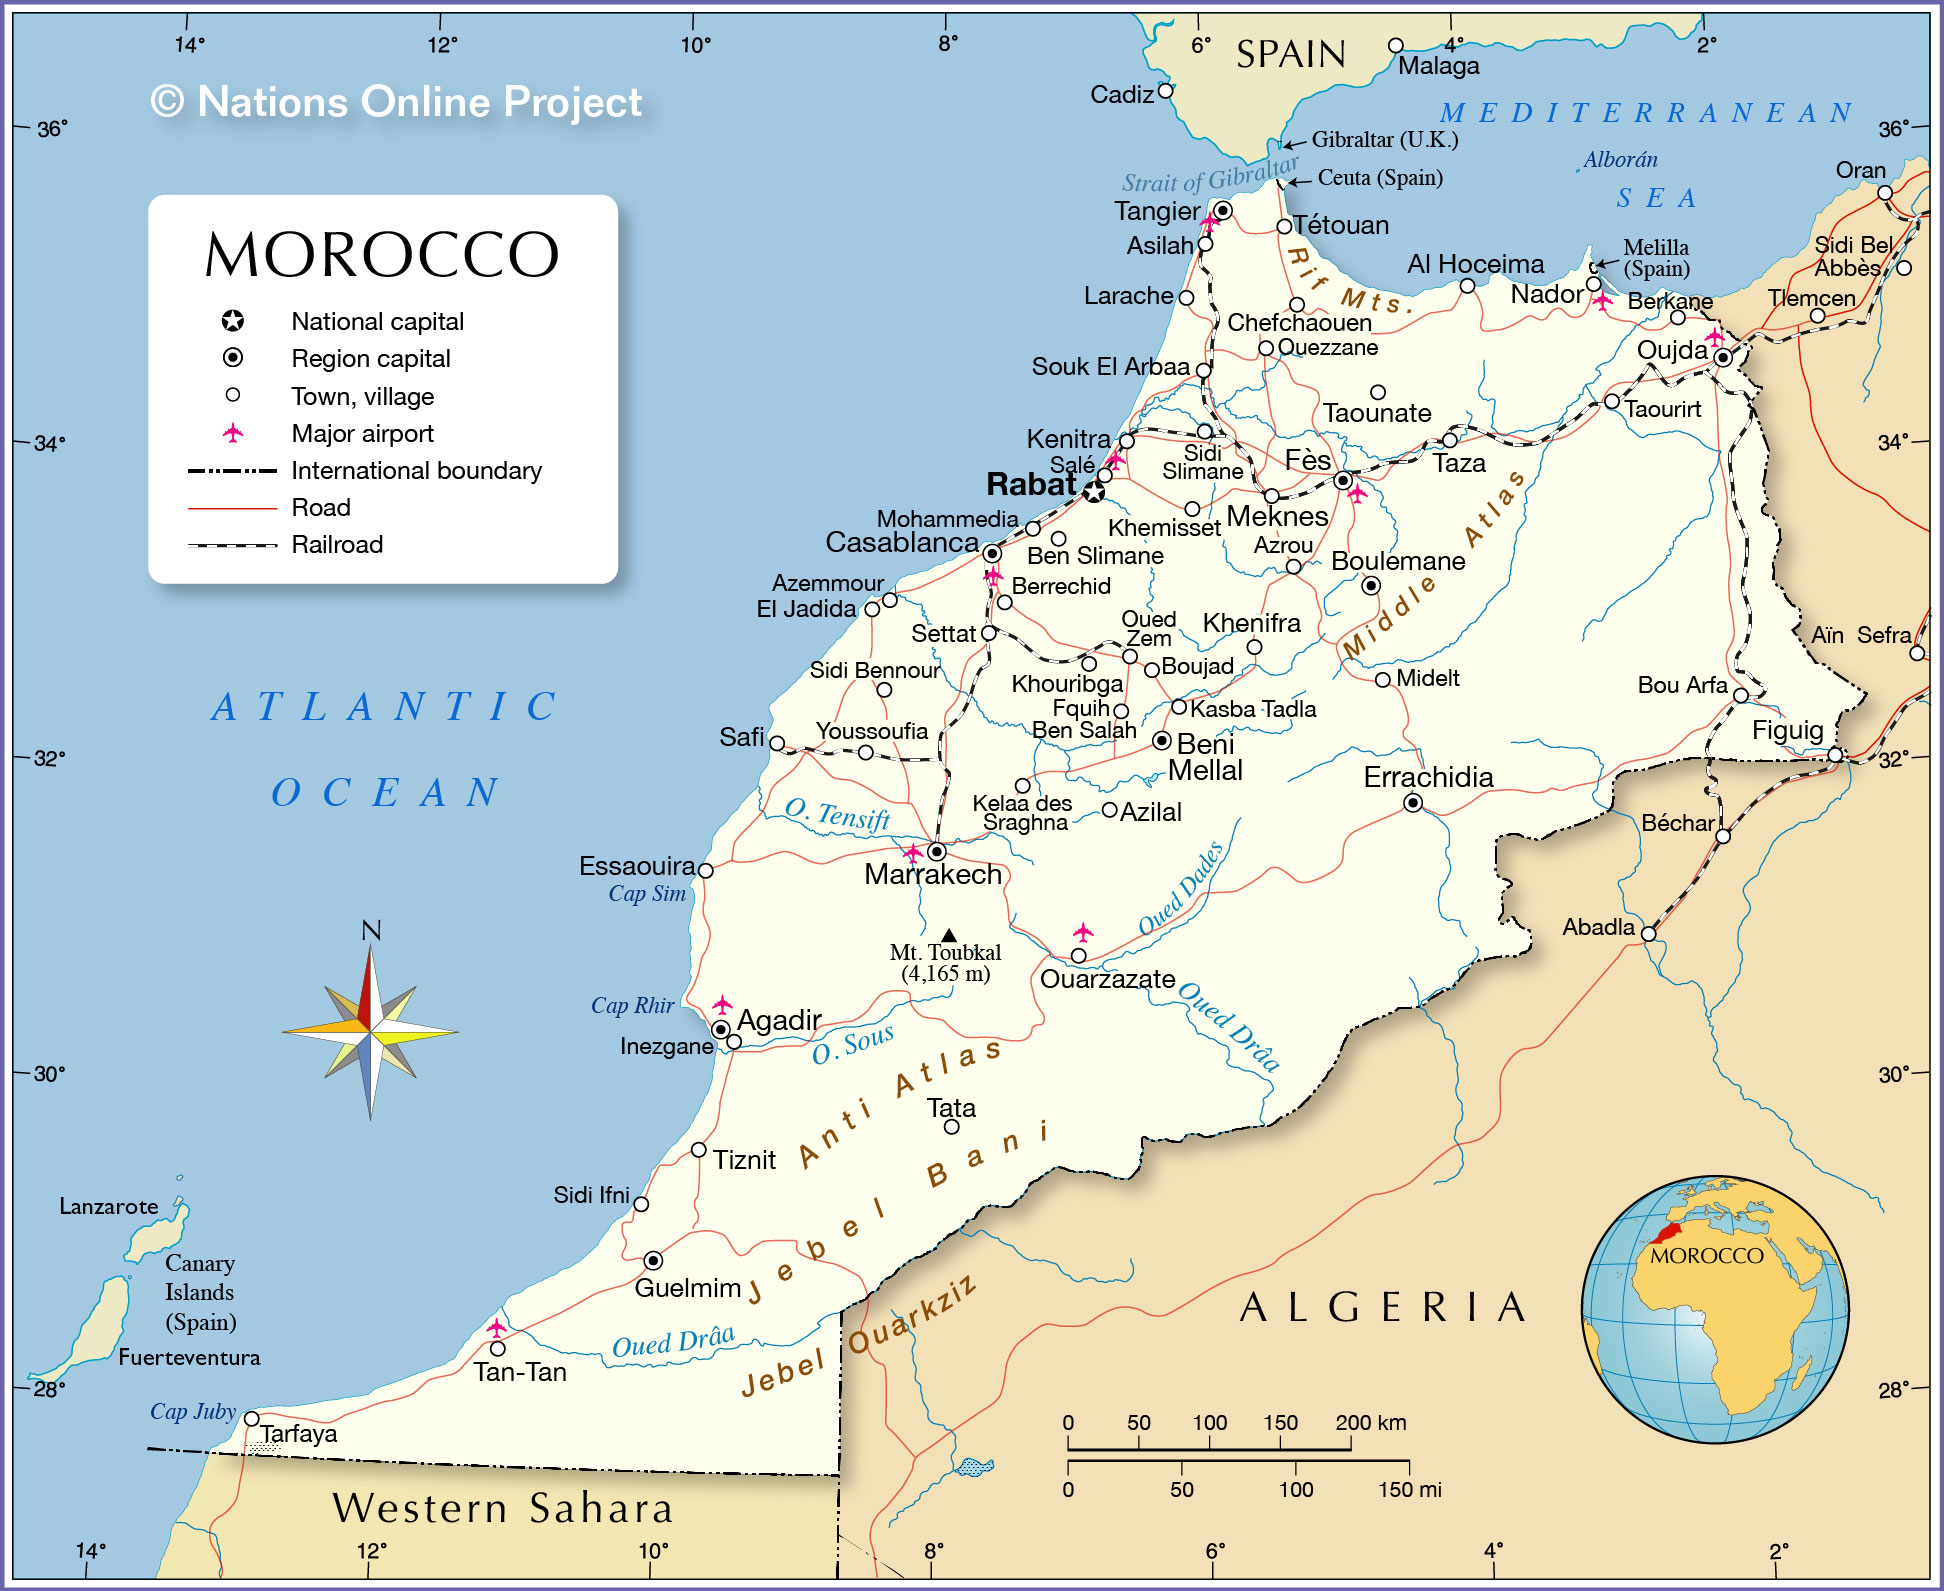 Is Morocco originally from Africa?